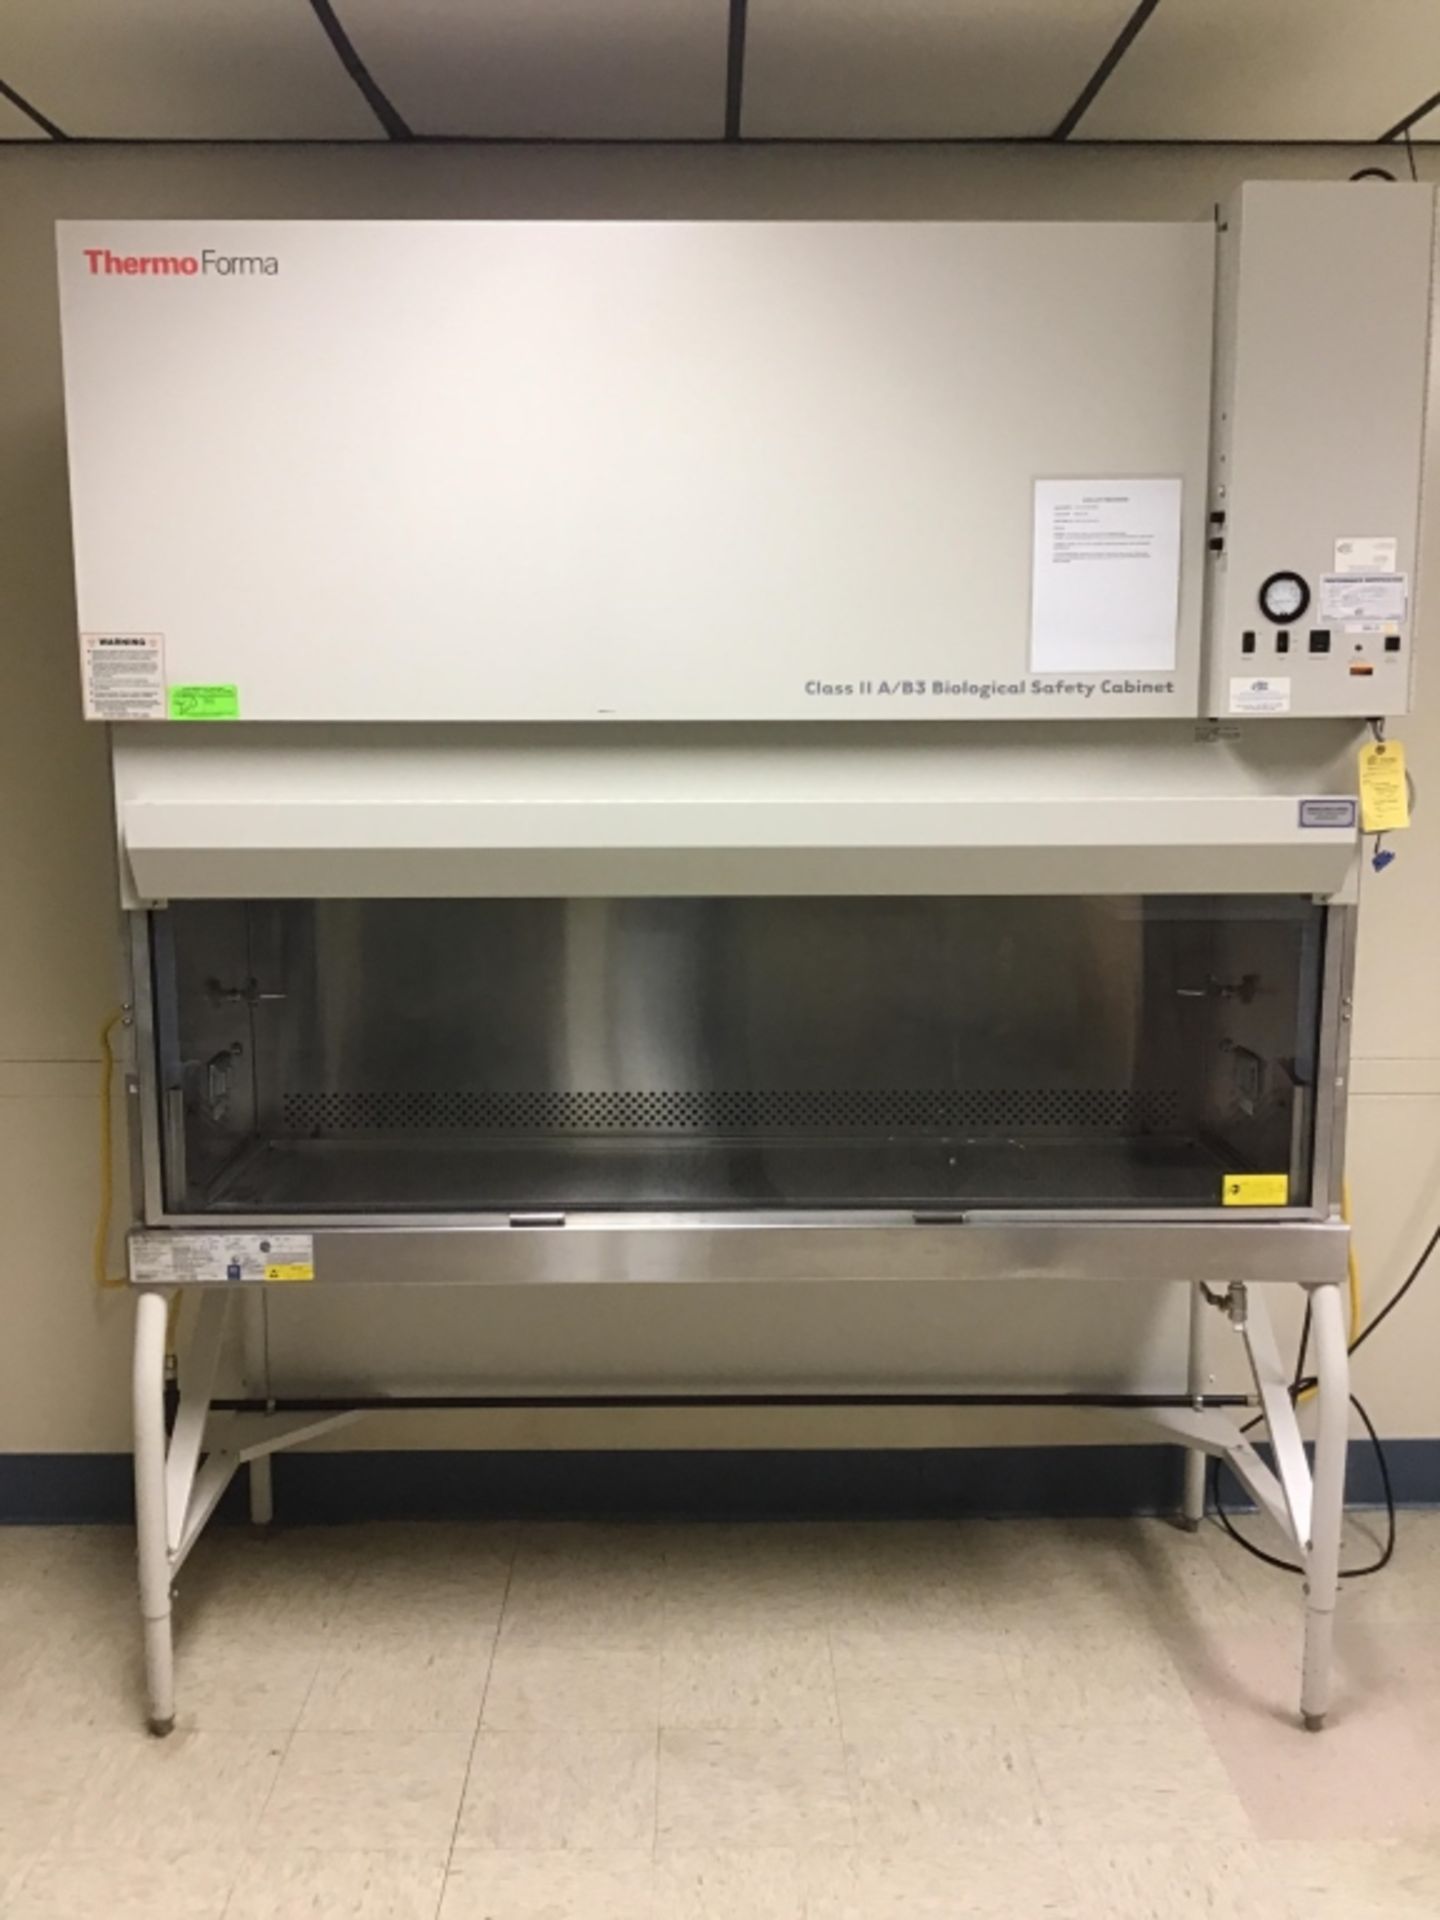 Thermo Forma class II A/ B3 biological safety cabinet